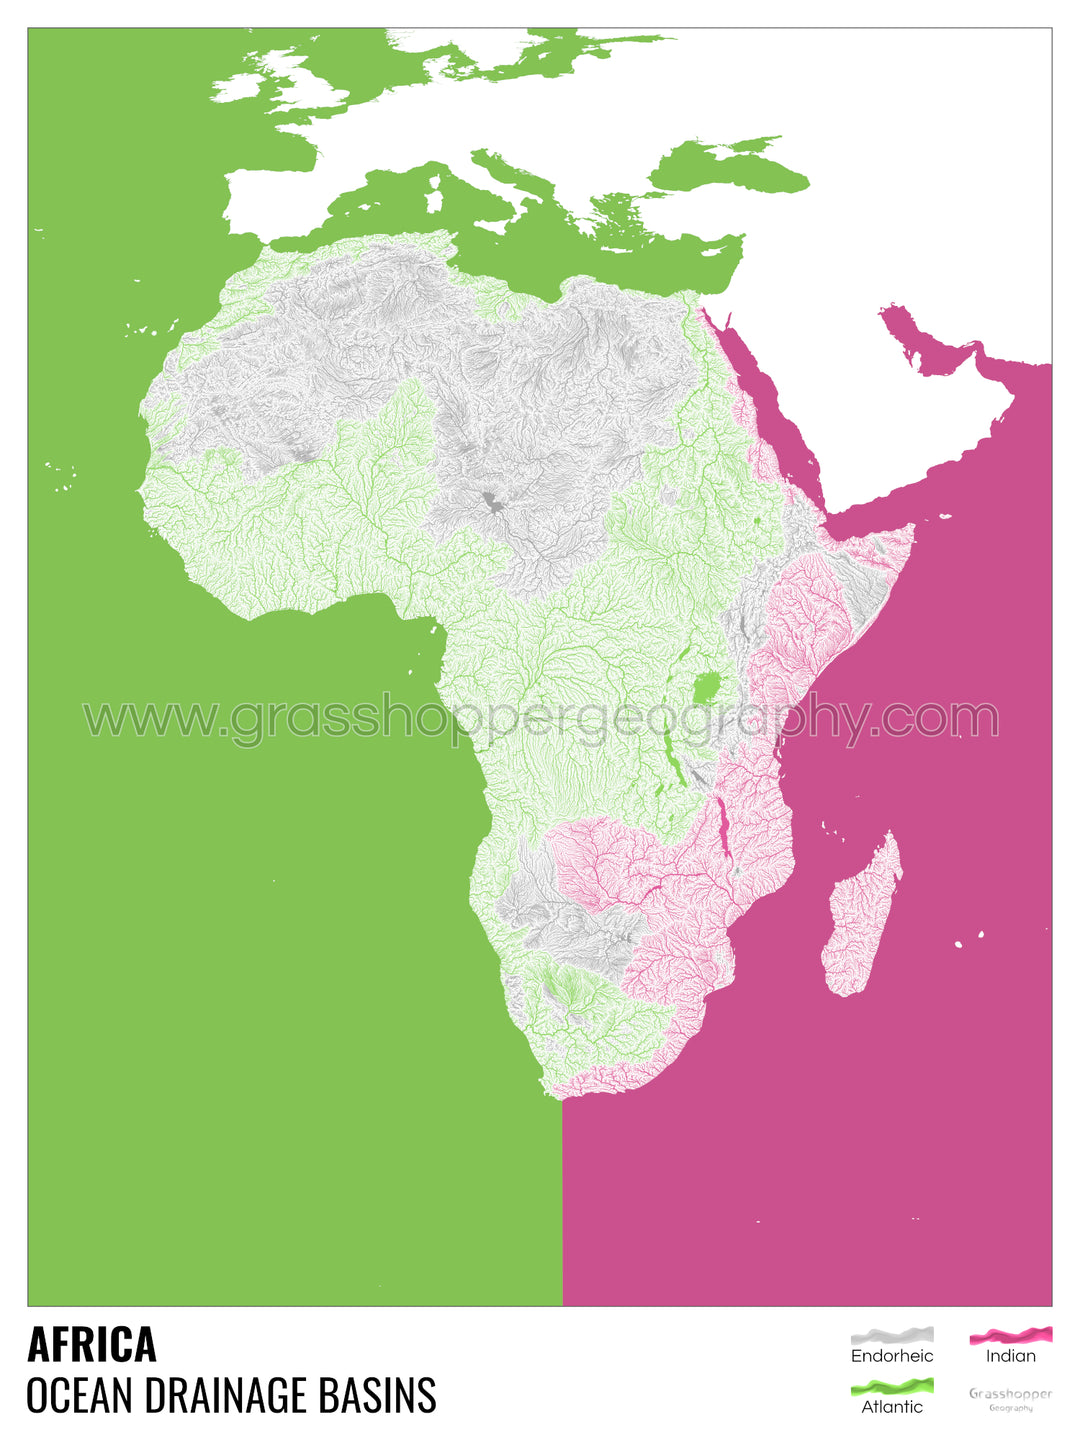 Africa - Ocean drainage basin map, white with legend v2 - Photo Art Print